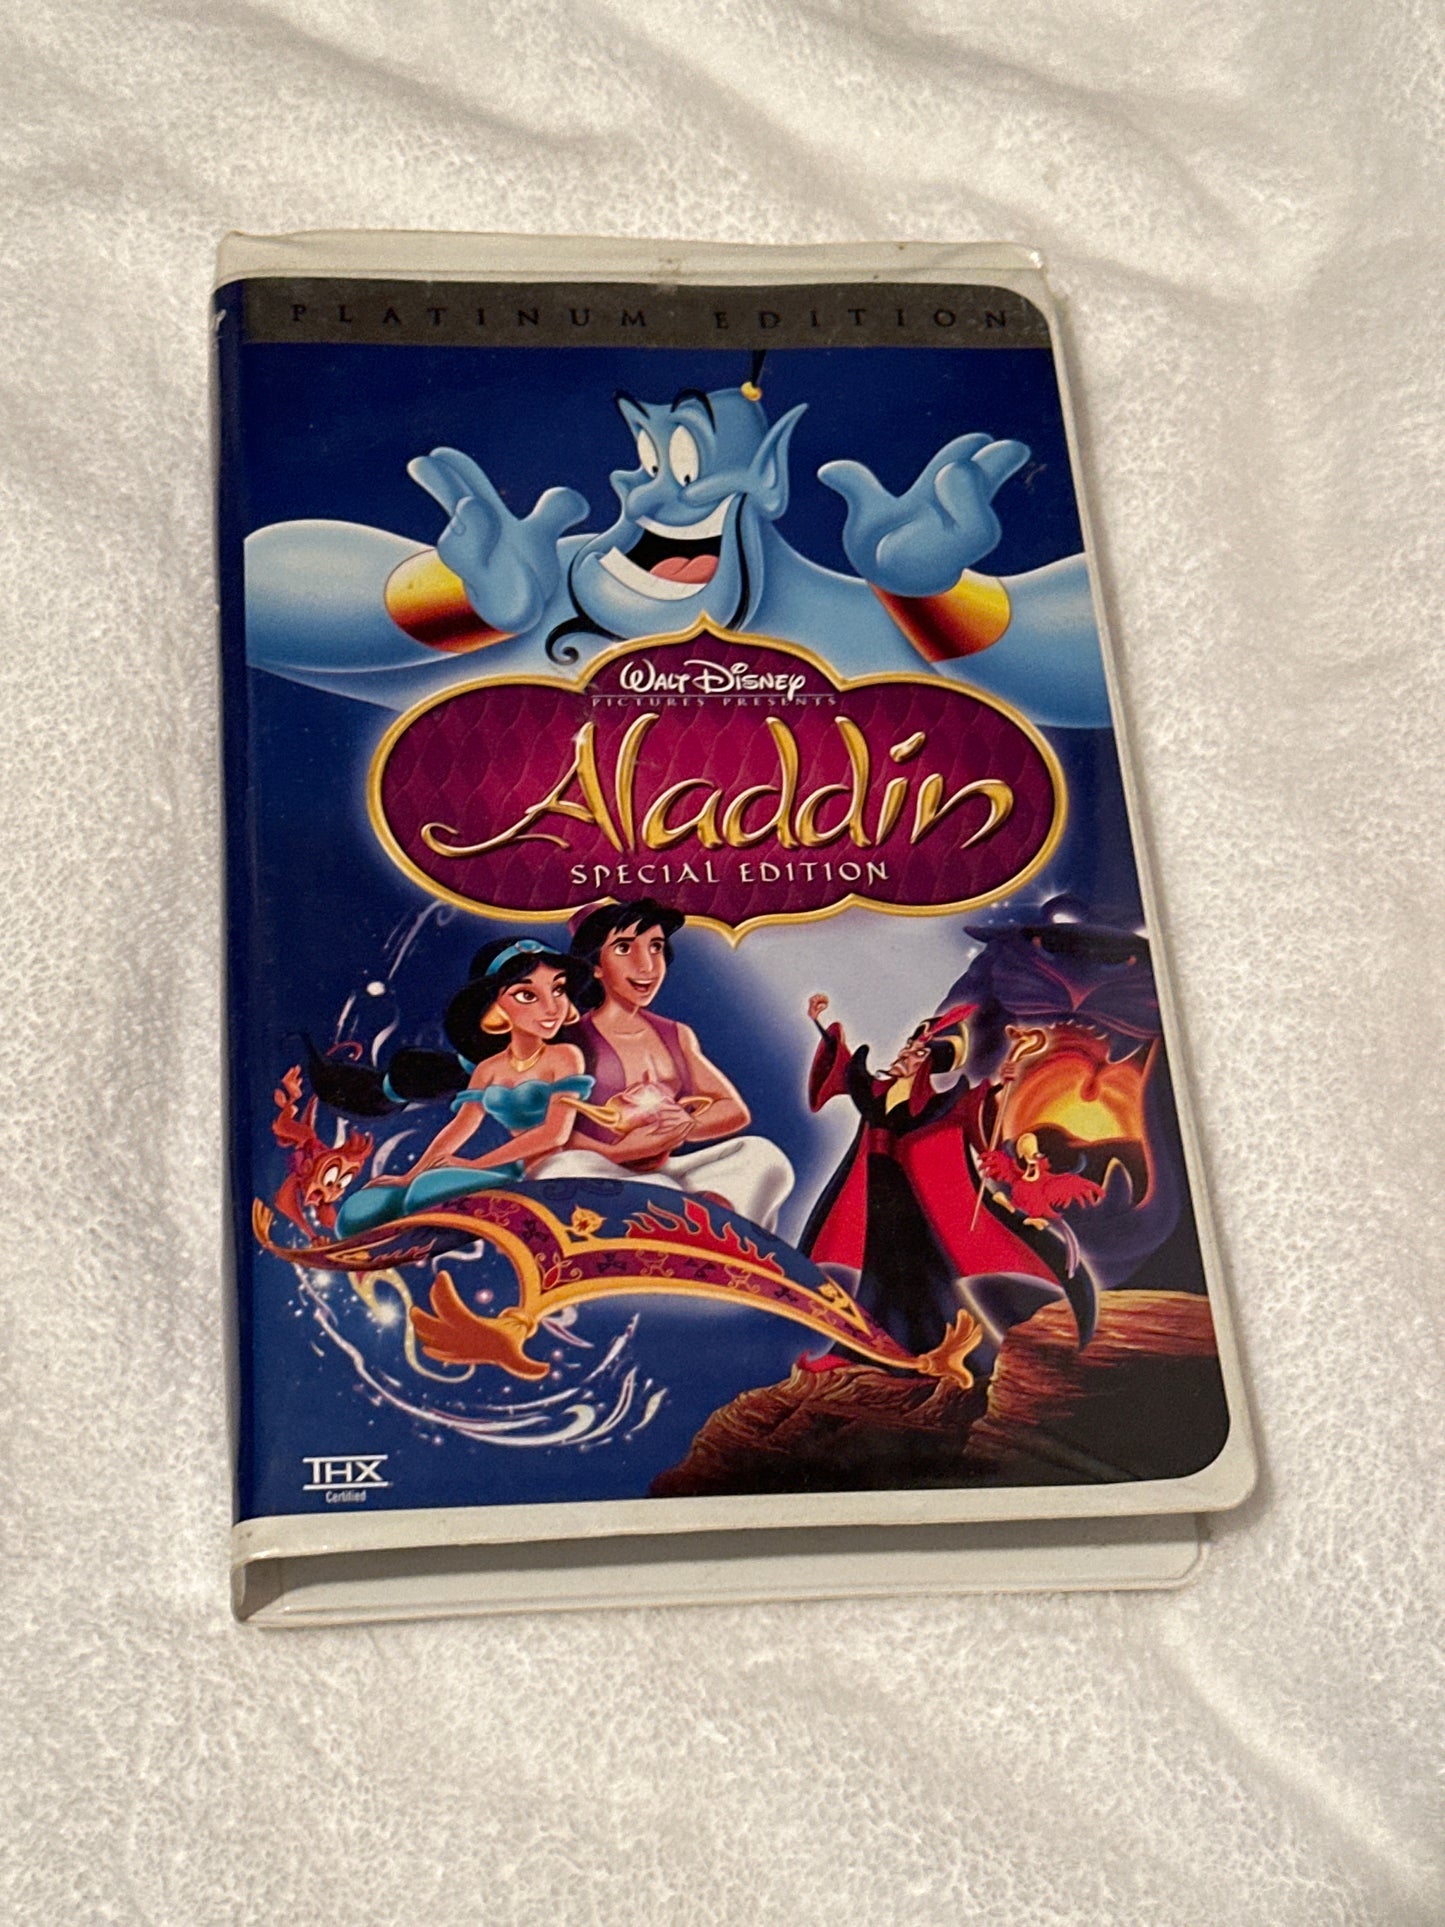 Vintage Animated Film VHS special edition